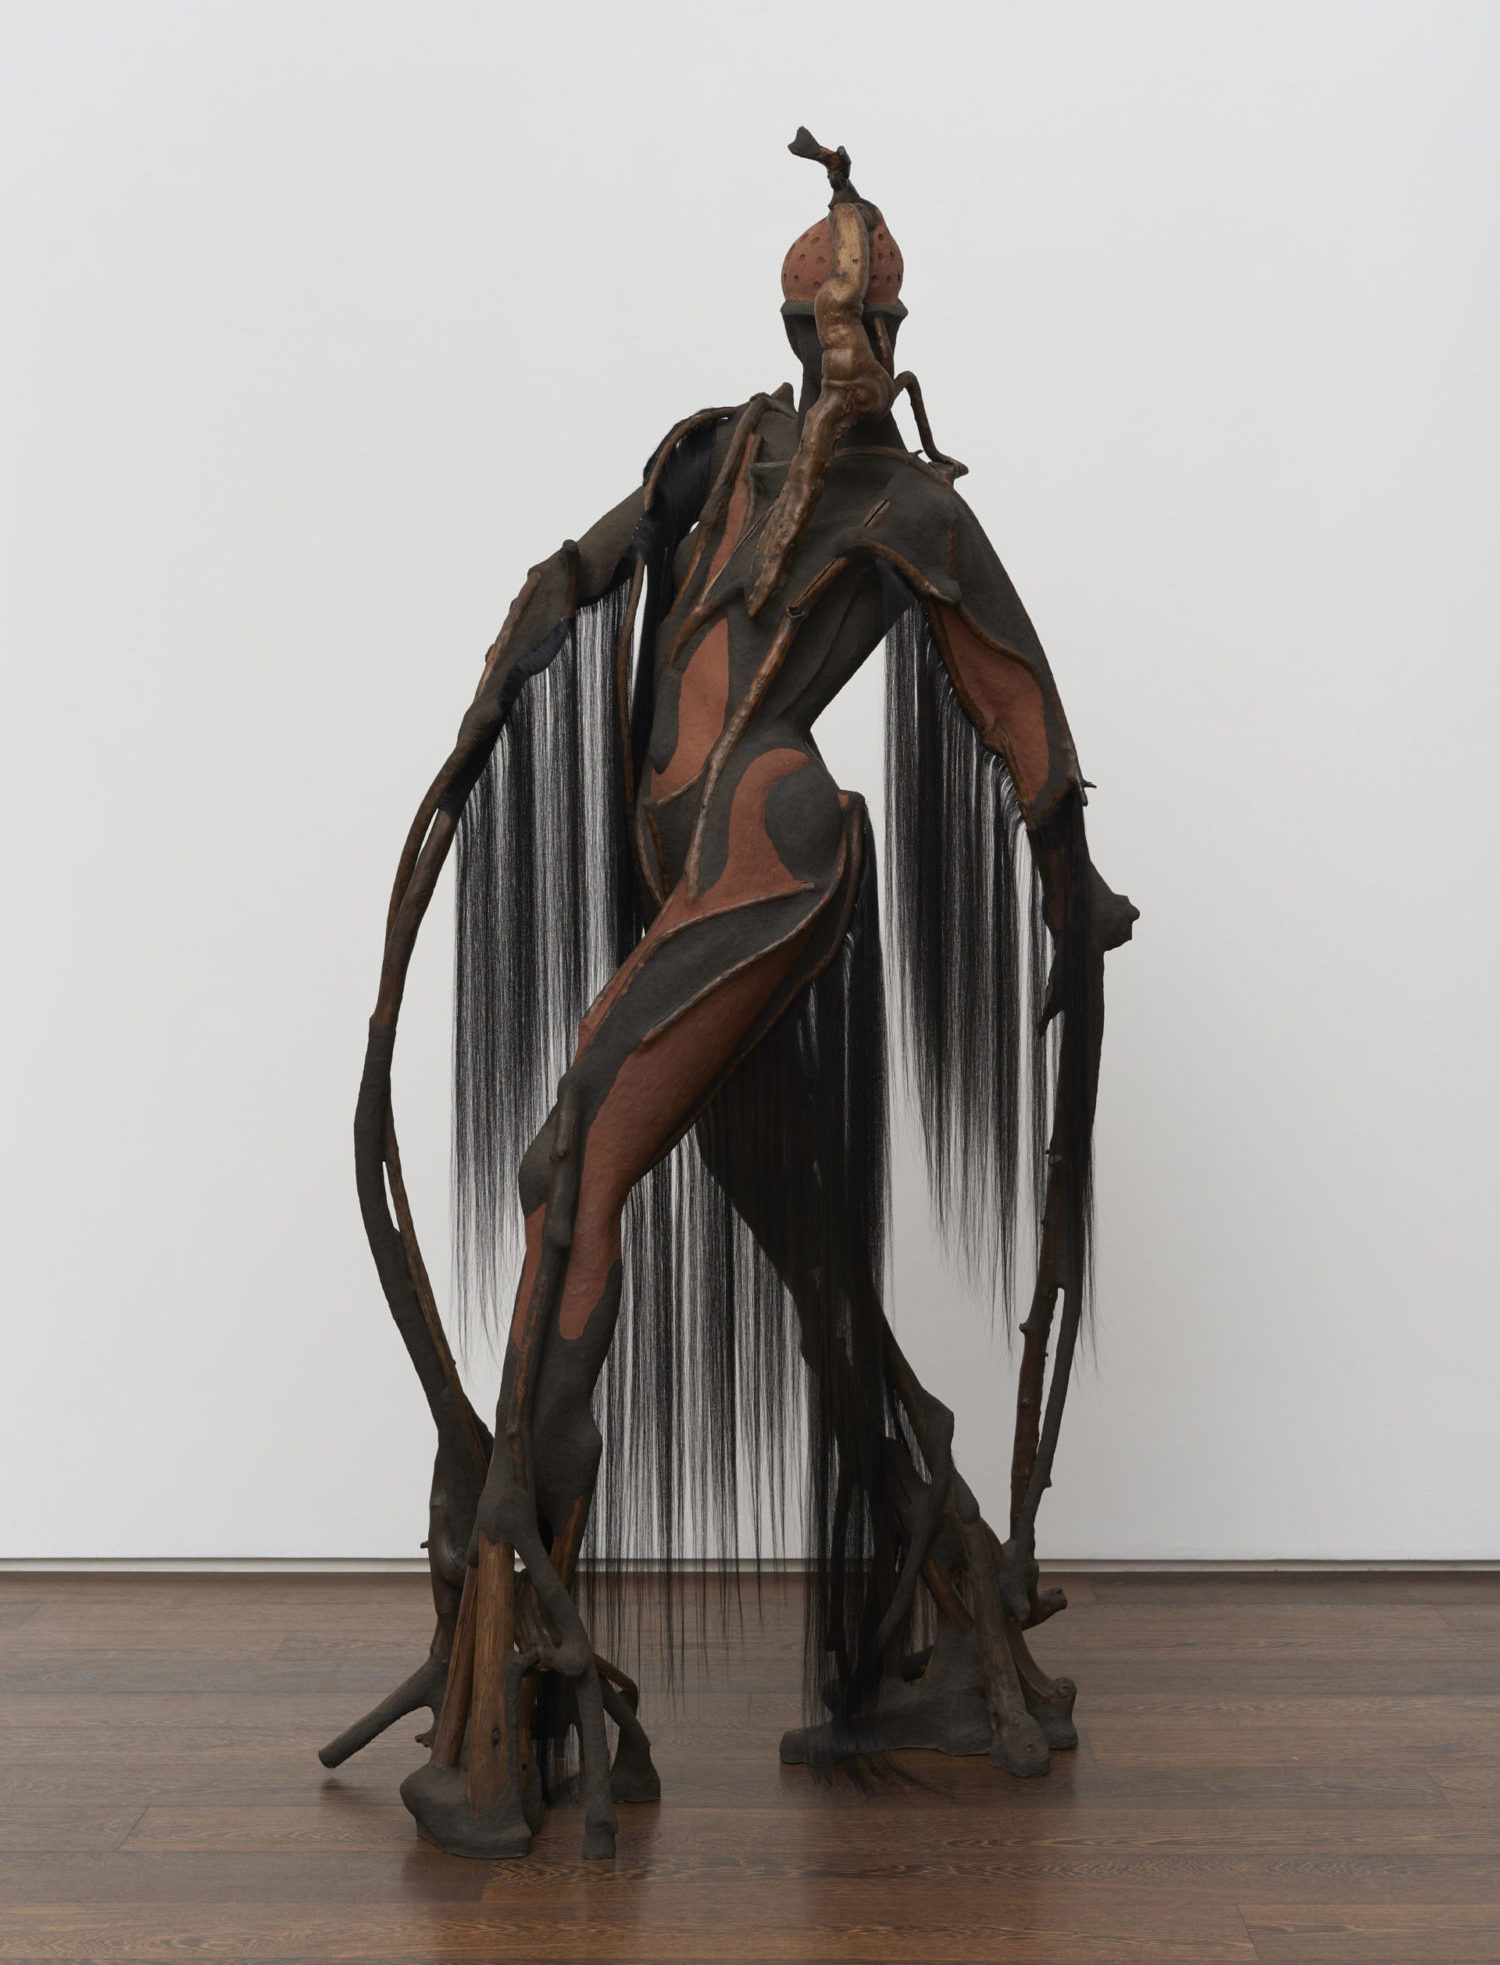 A freestanding figurative sculpture composed of dark brown wood and black fibers is set against a white wall background